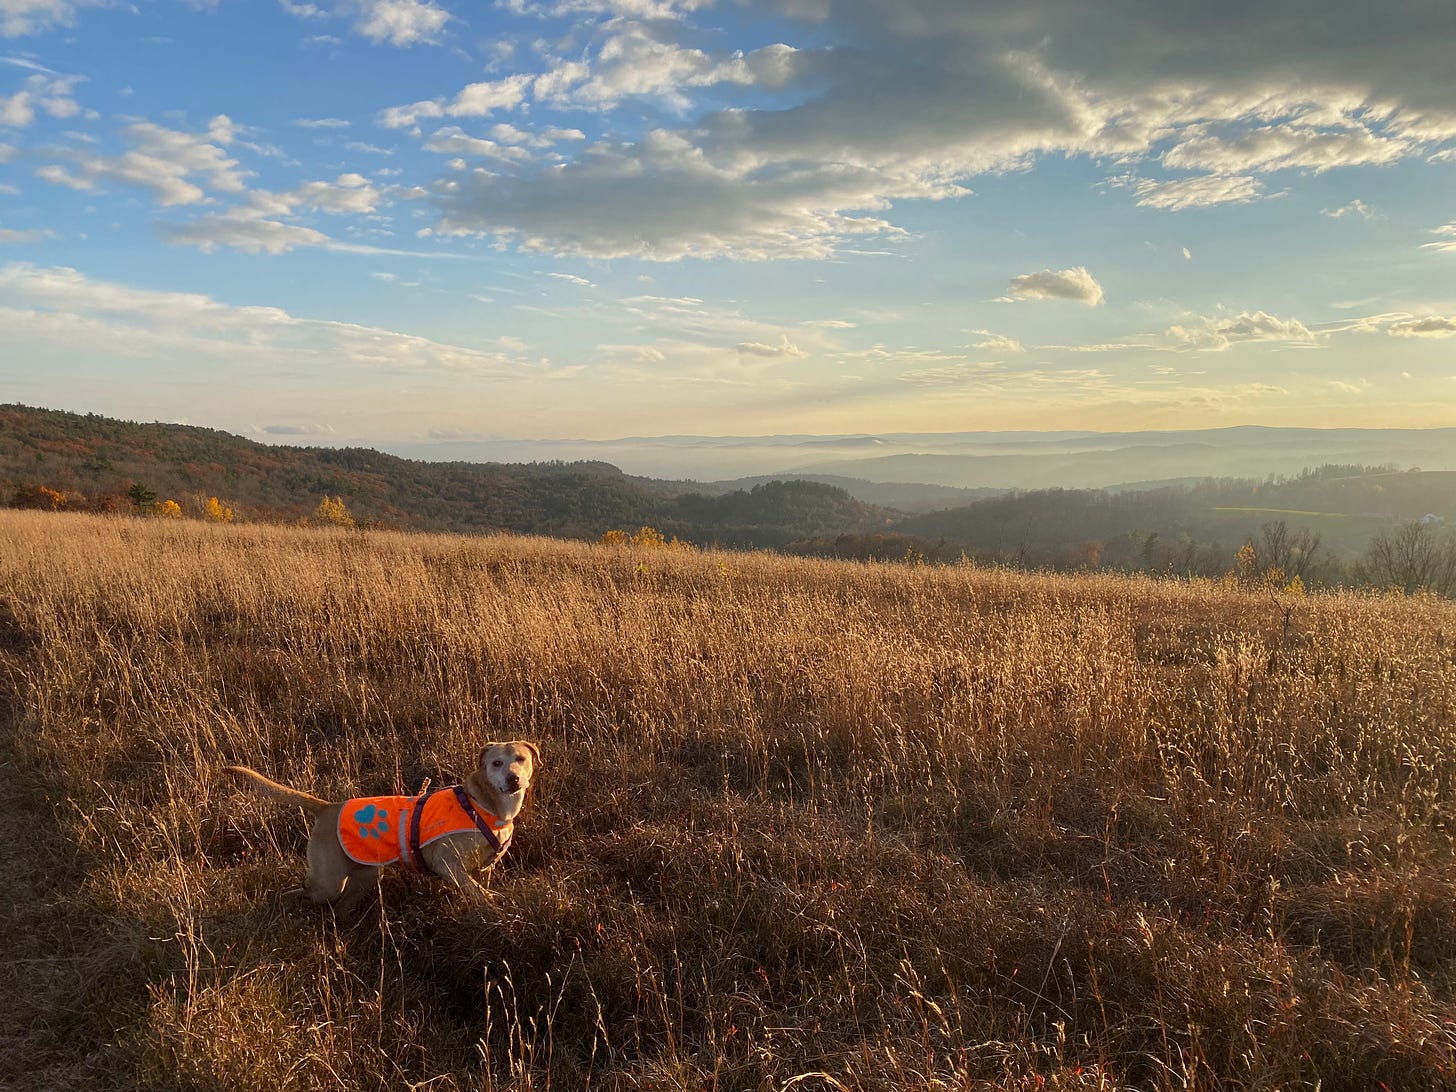 My brown dog, wearing an orange vest, stands on a hill in a field of brown grass, lit up by the sunset. Behind her is a view of dark, misty hills. The blue sky is studded with white clouds, and there’s a band of pale orange on the horizon.